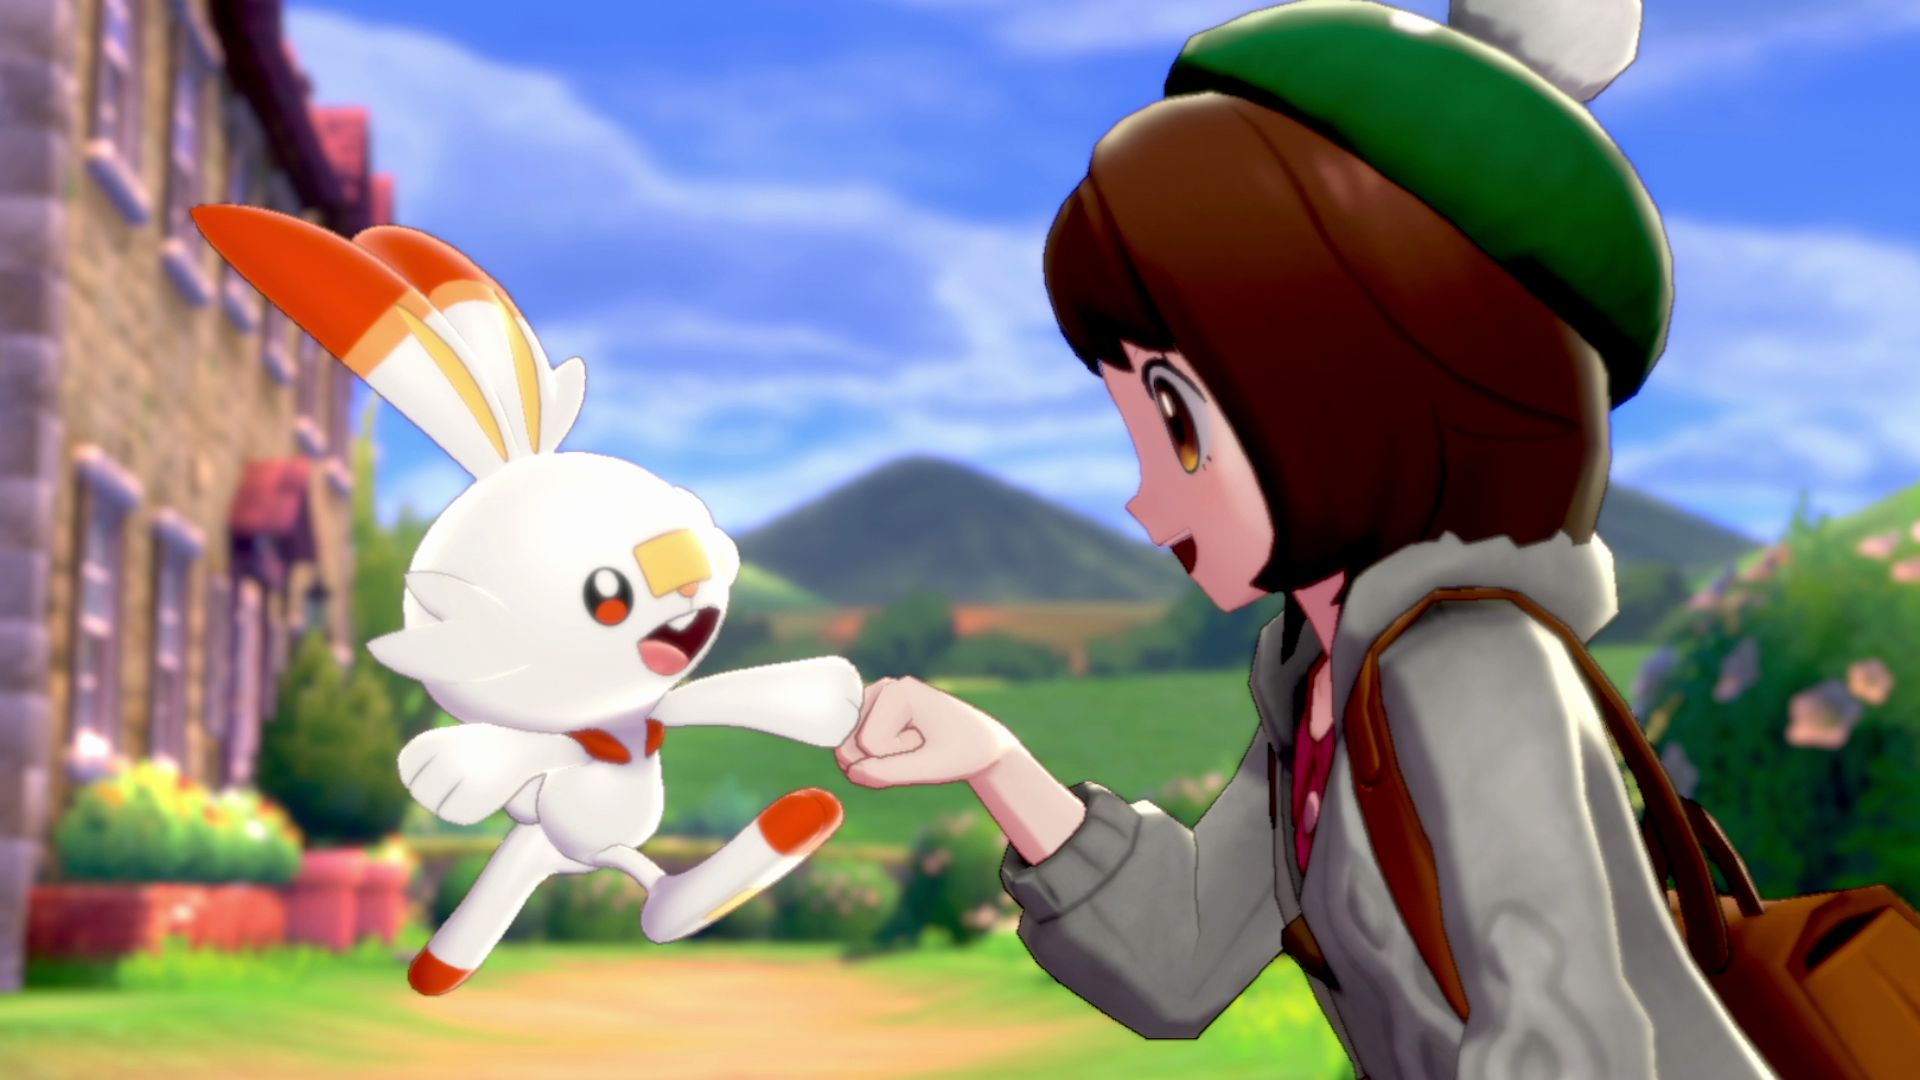 Pokemon Sword and Shield Version Differences and Exclusives